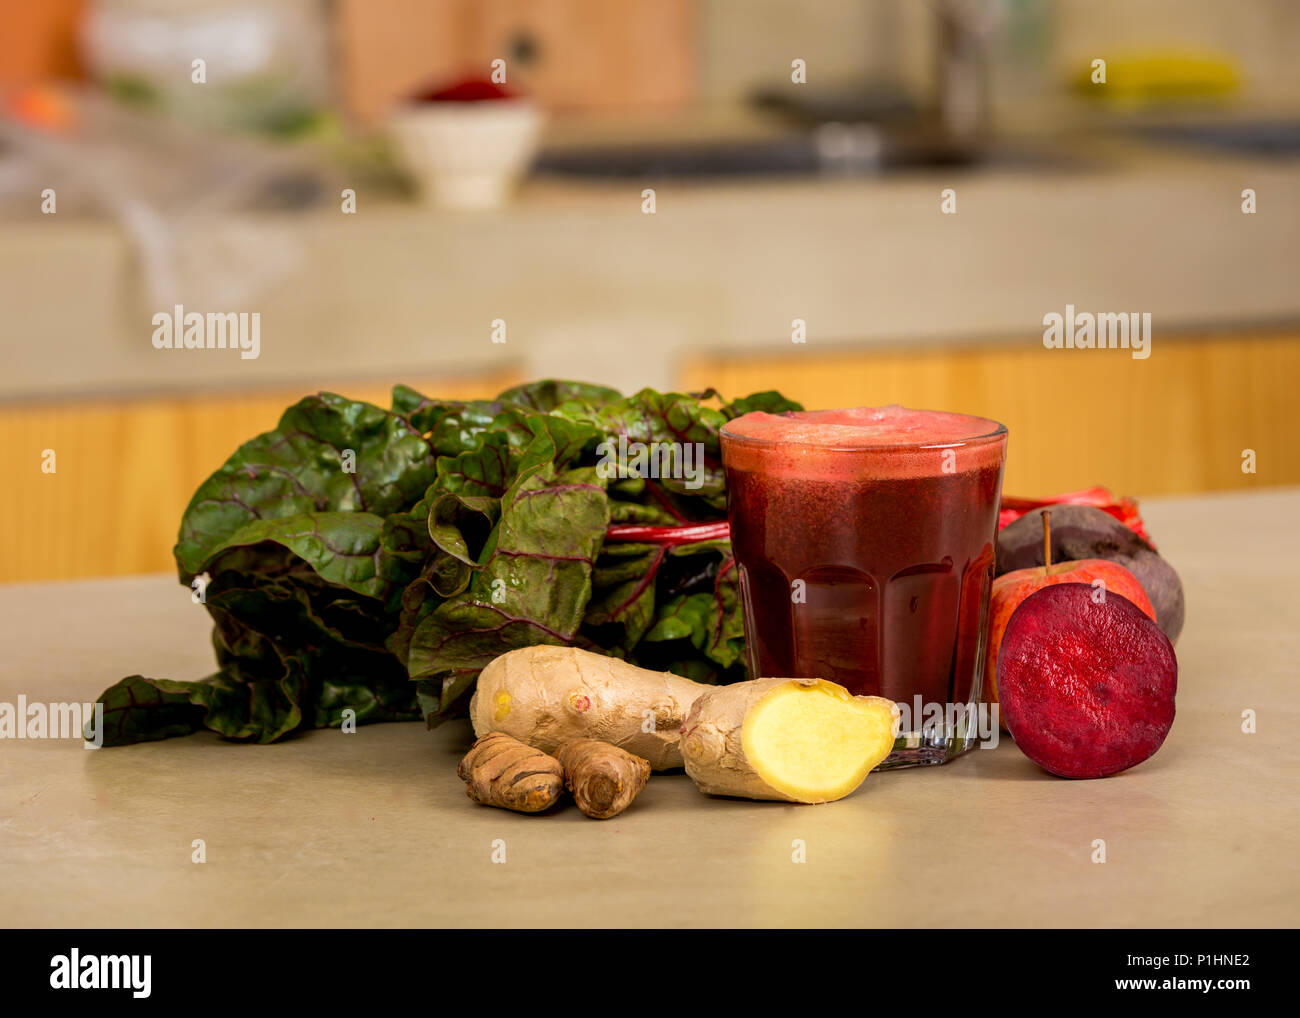 Glass jar of red juice, a detox beverage. Stock Photo